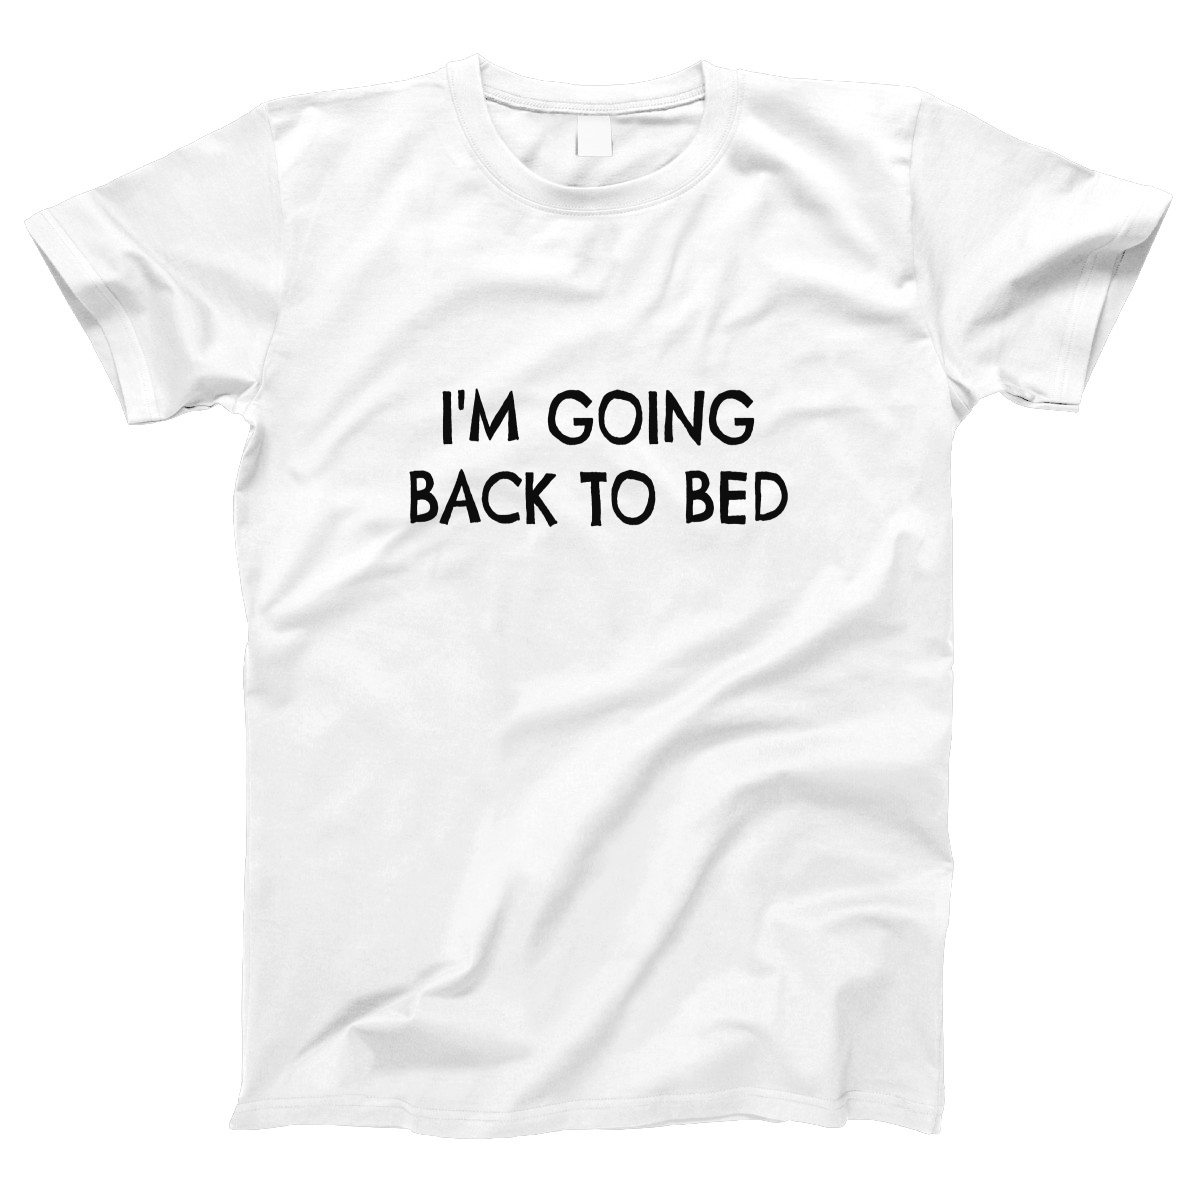 I'm Going Back to Bed Women's T-shirt | White